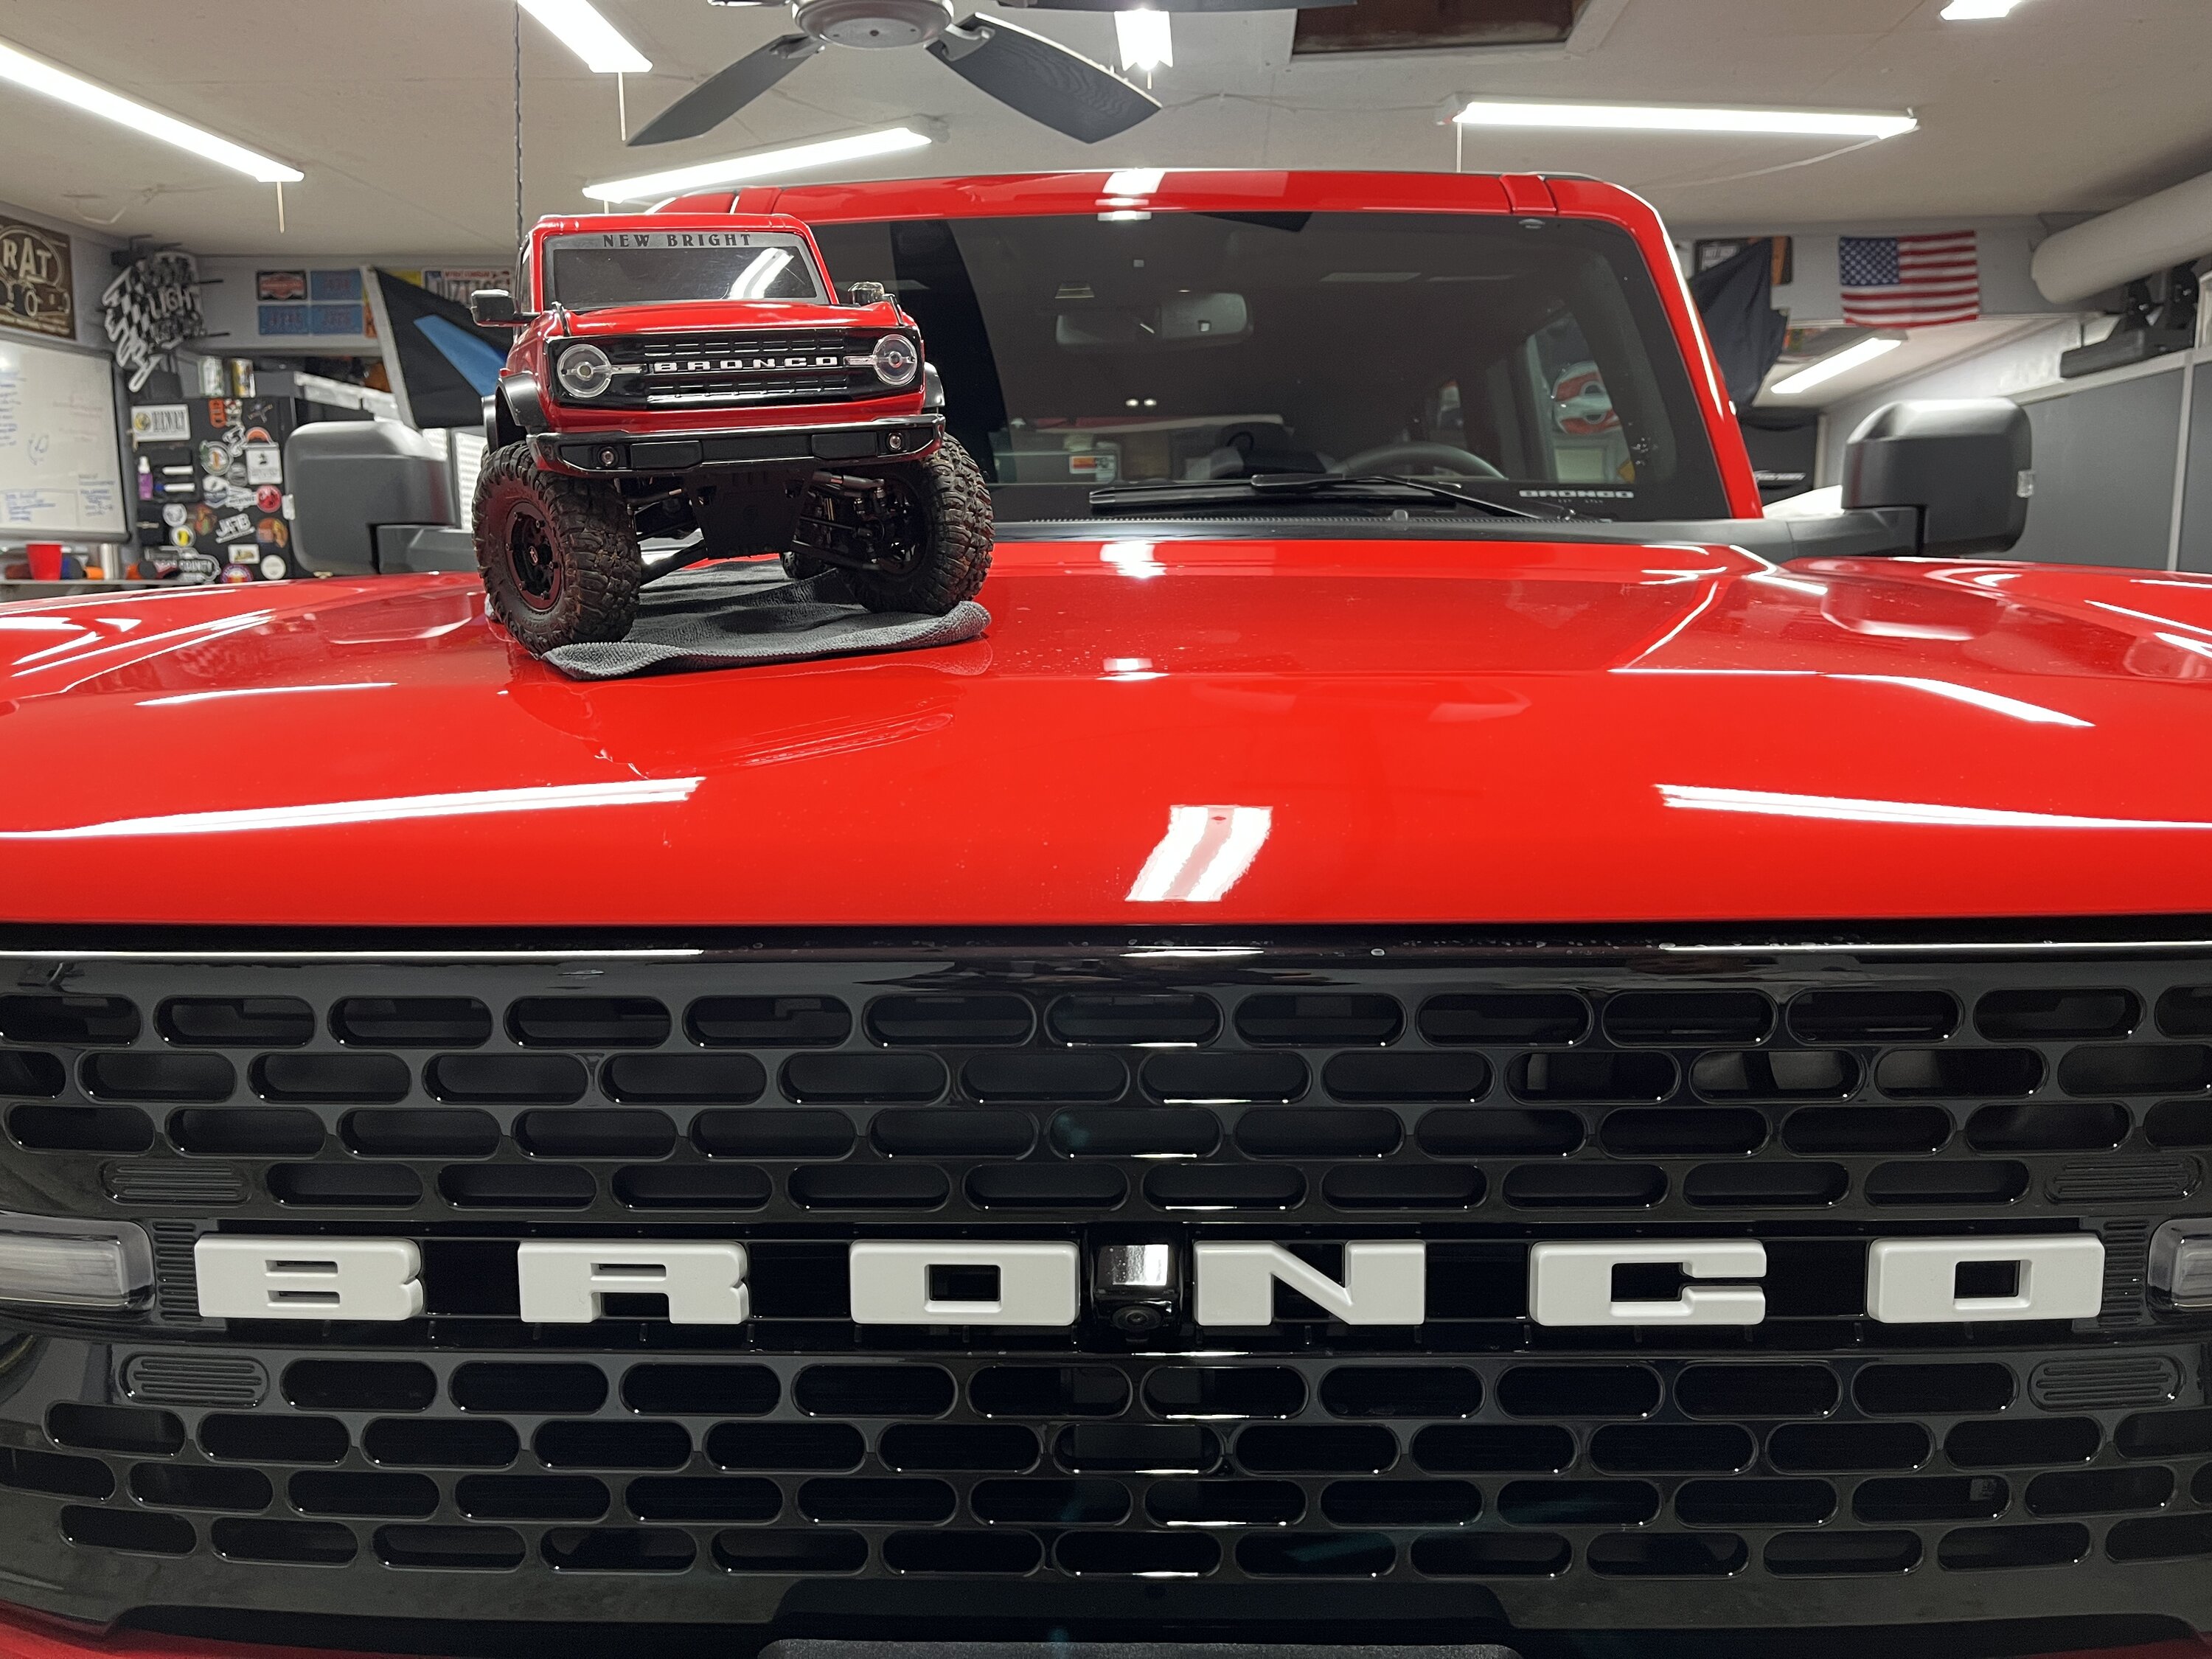 Ford Bronco Finally brought it home after 17 months - '22 WildTrak Sasquatch High Lux in Red IMG_4878.JPG